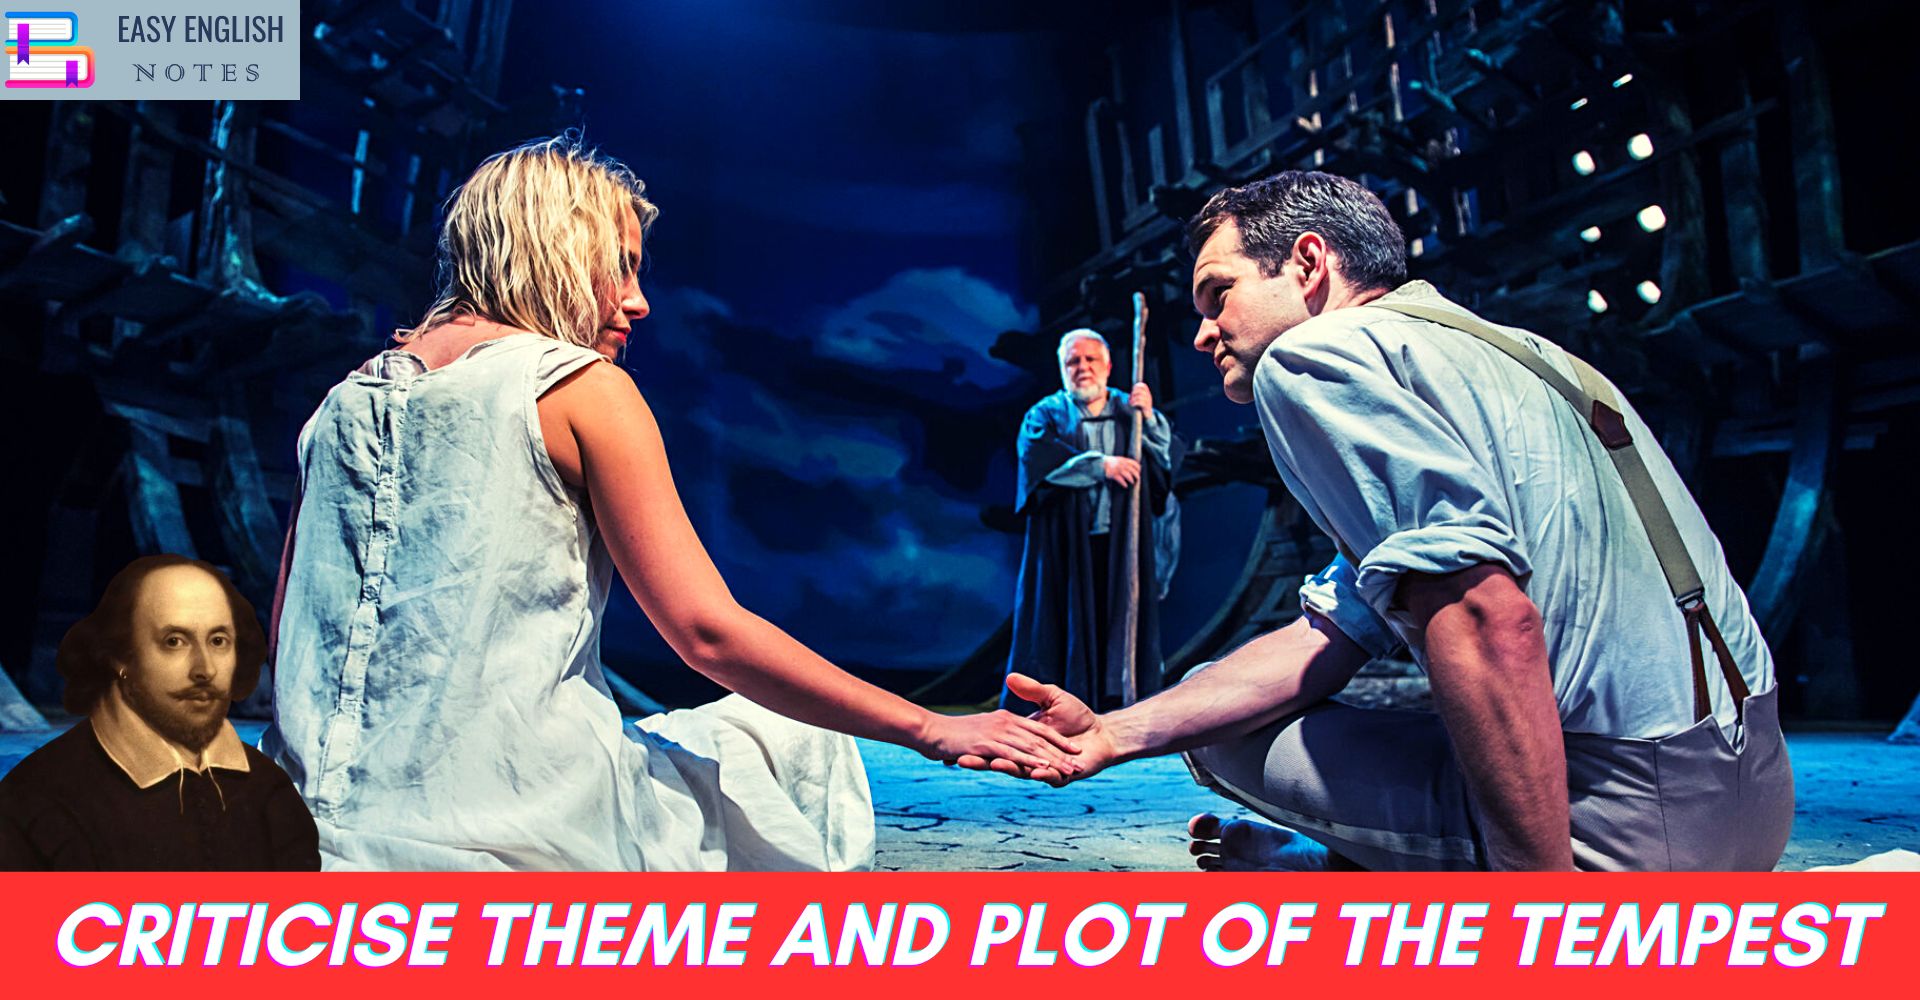 Criticise Theme And Plot Of The Tempest